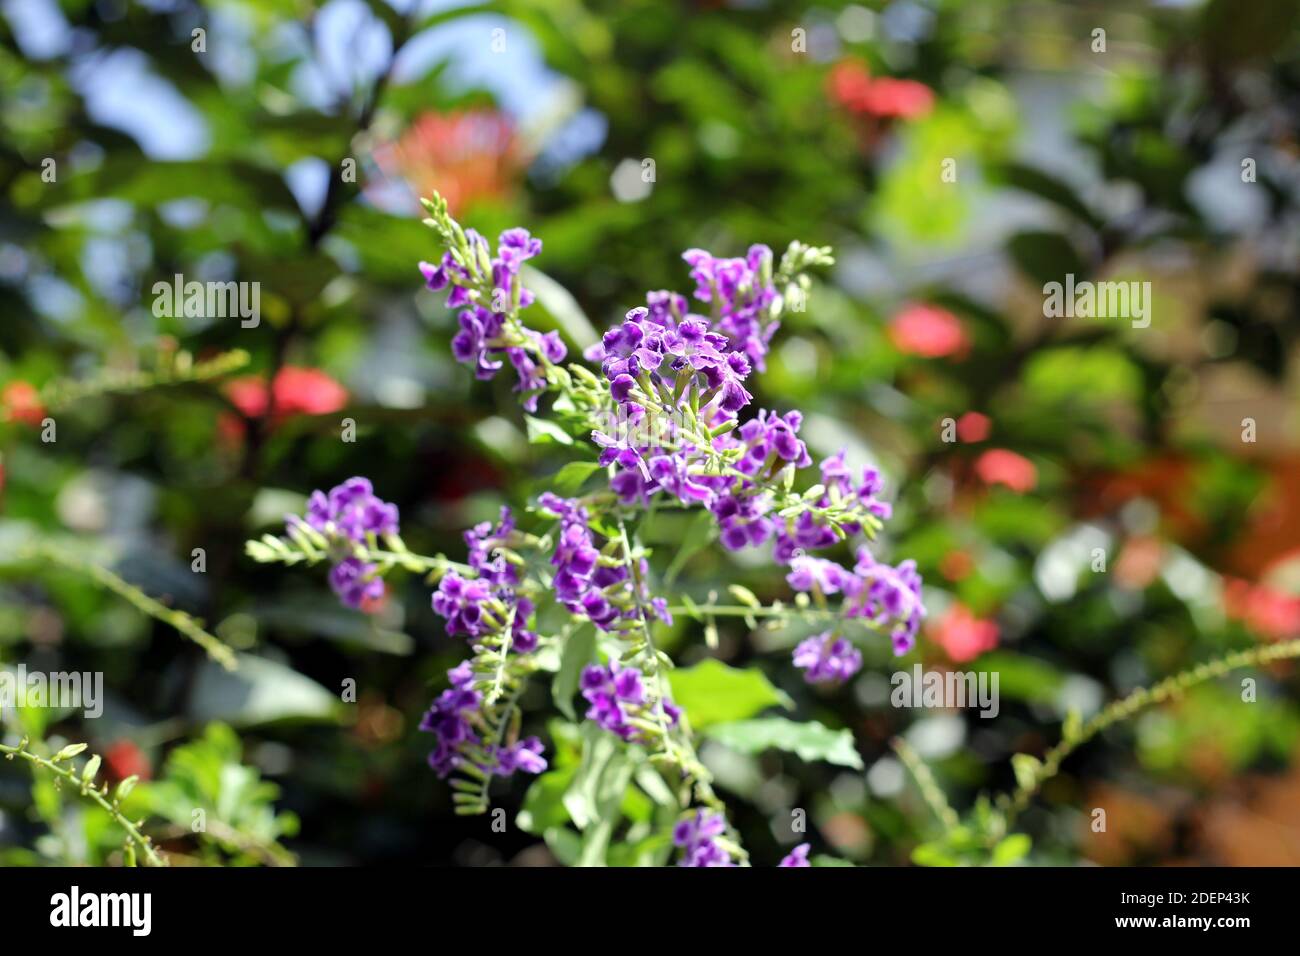 Selective focus on small purple flowers bunch Stock Photo